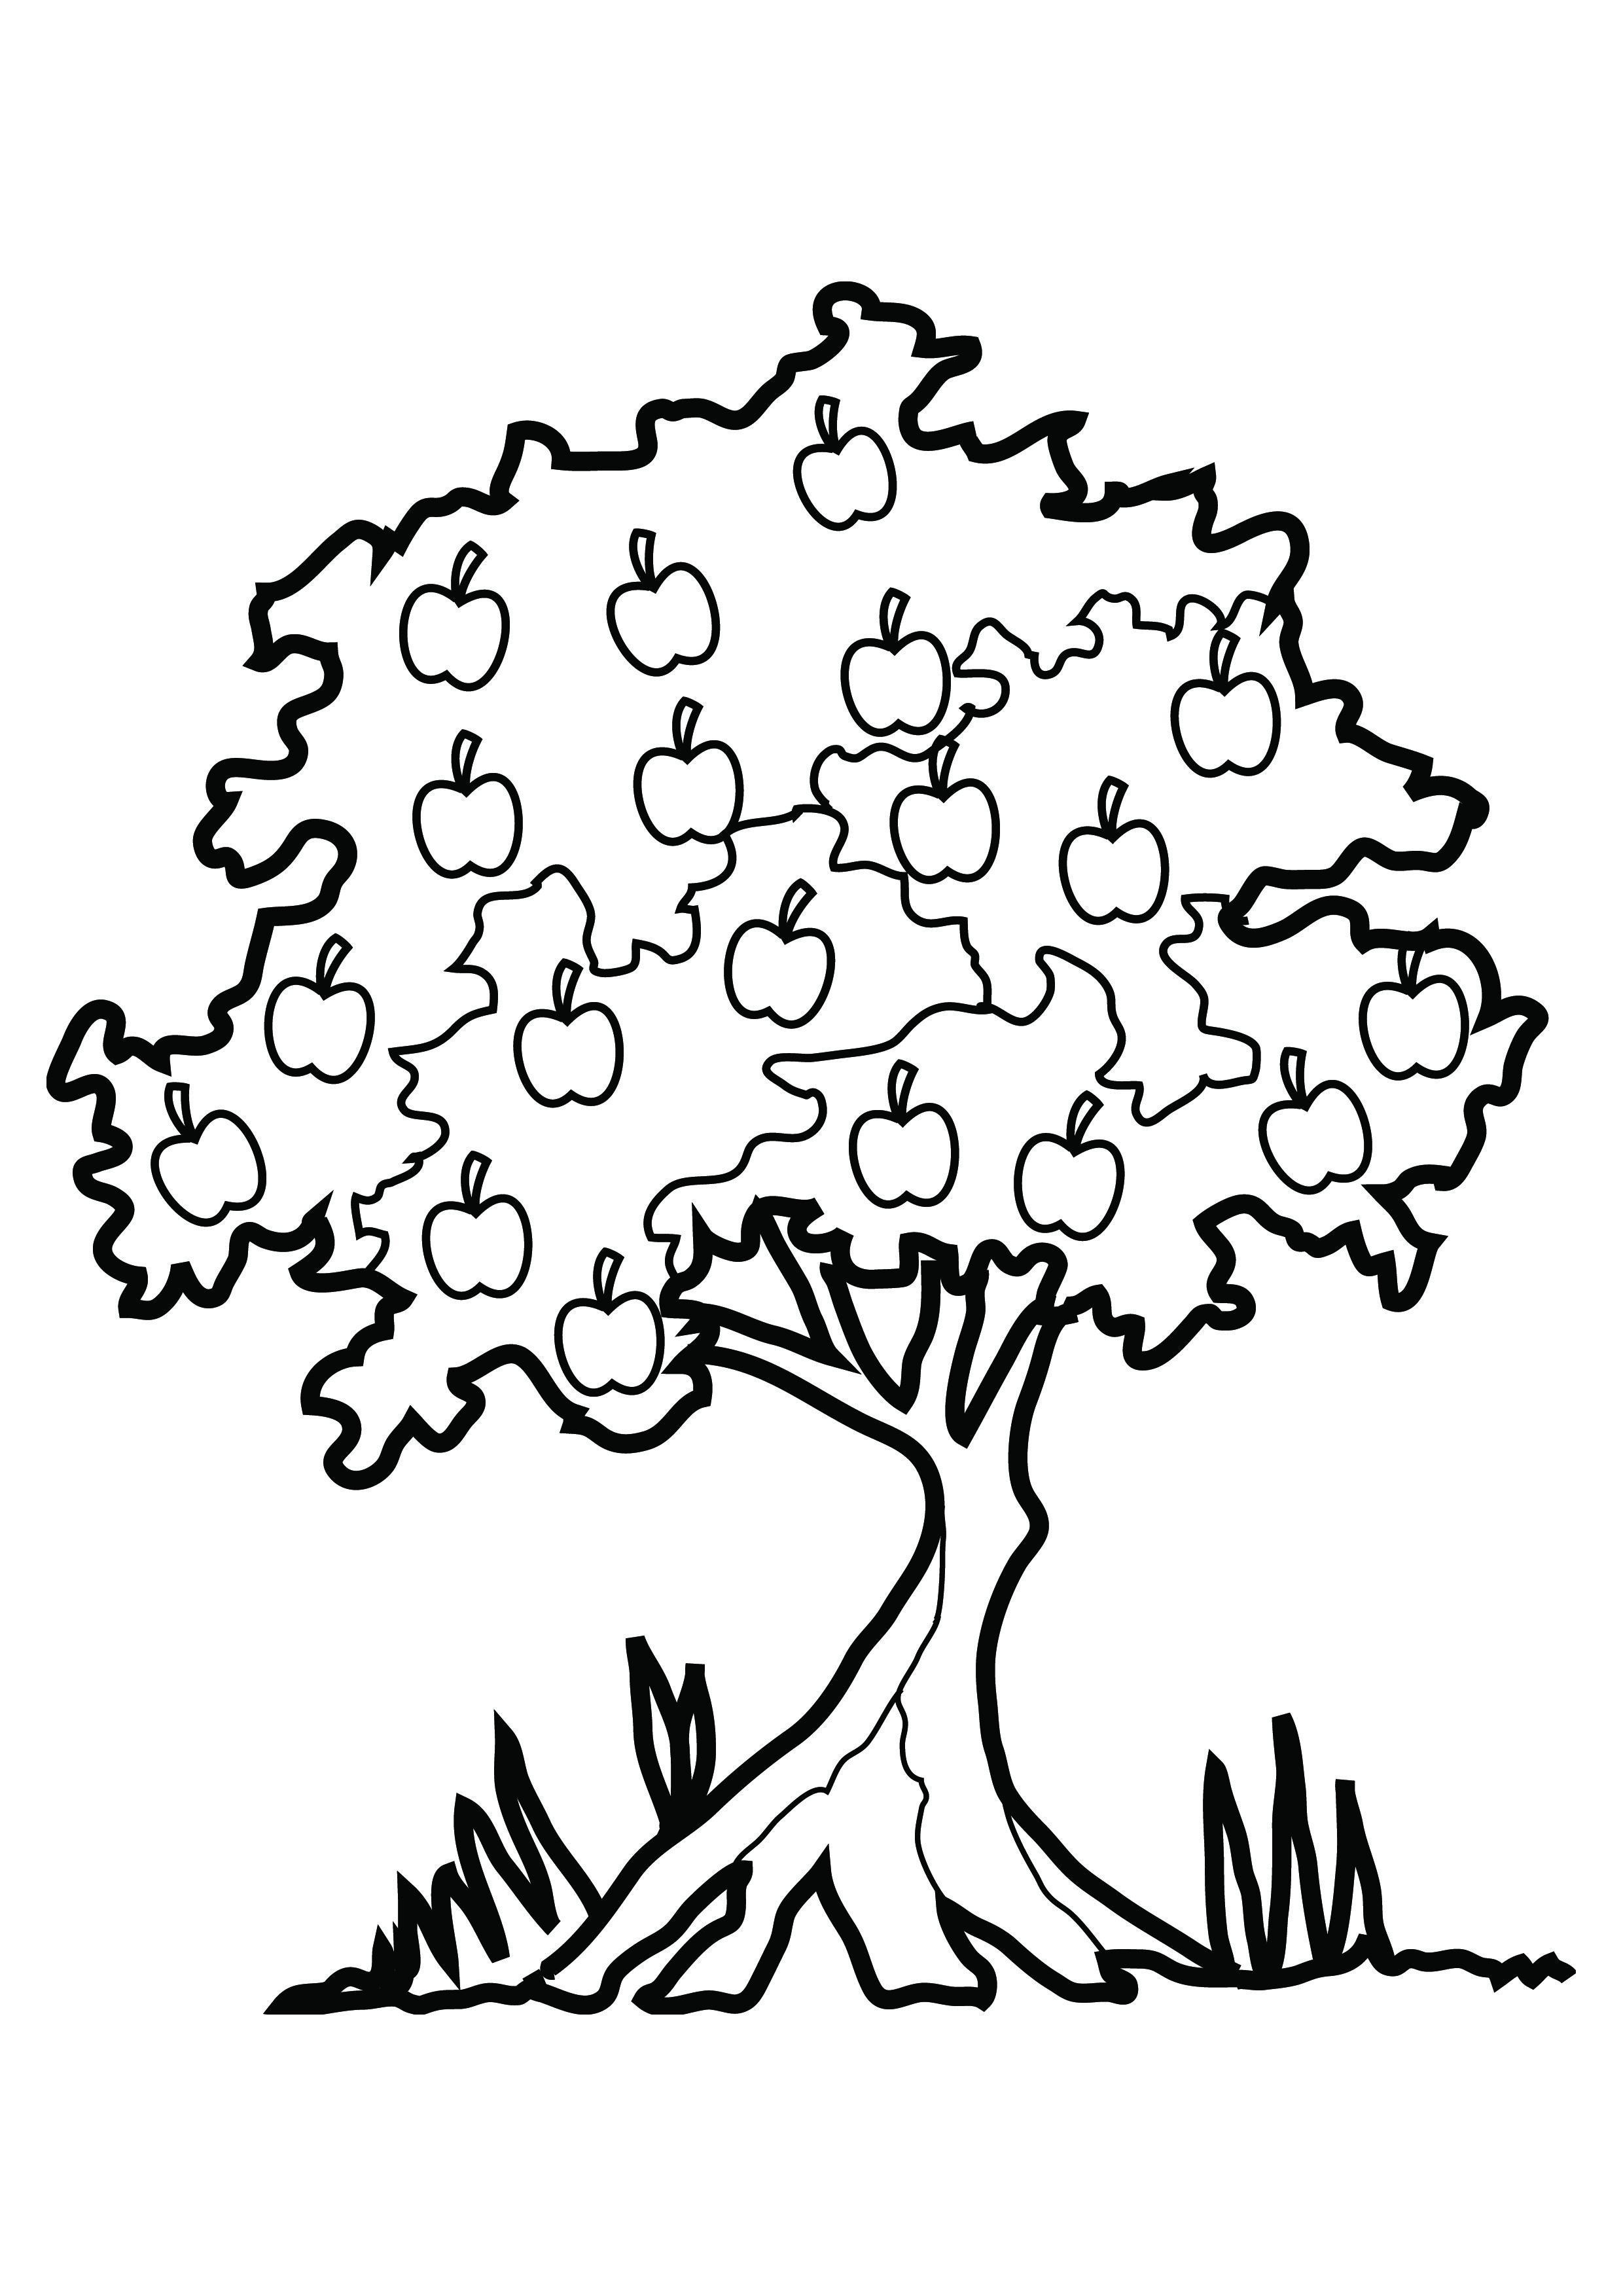 Coloring Pages Of Pine Trees At GetColorings Free Printable Colorings Pages To Print And Color